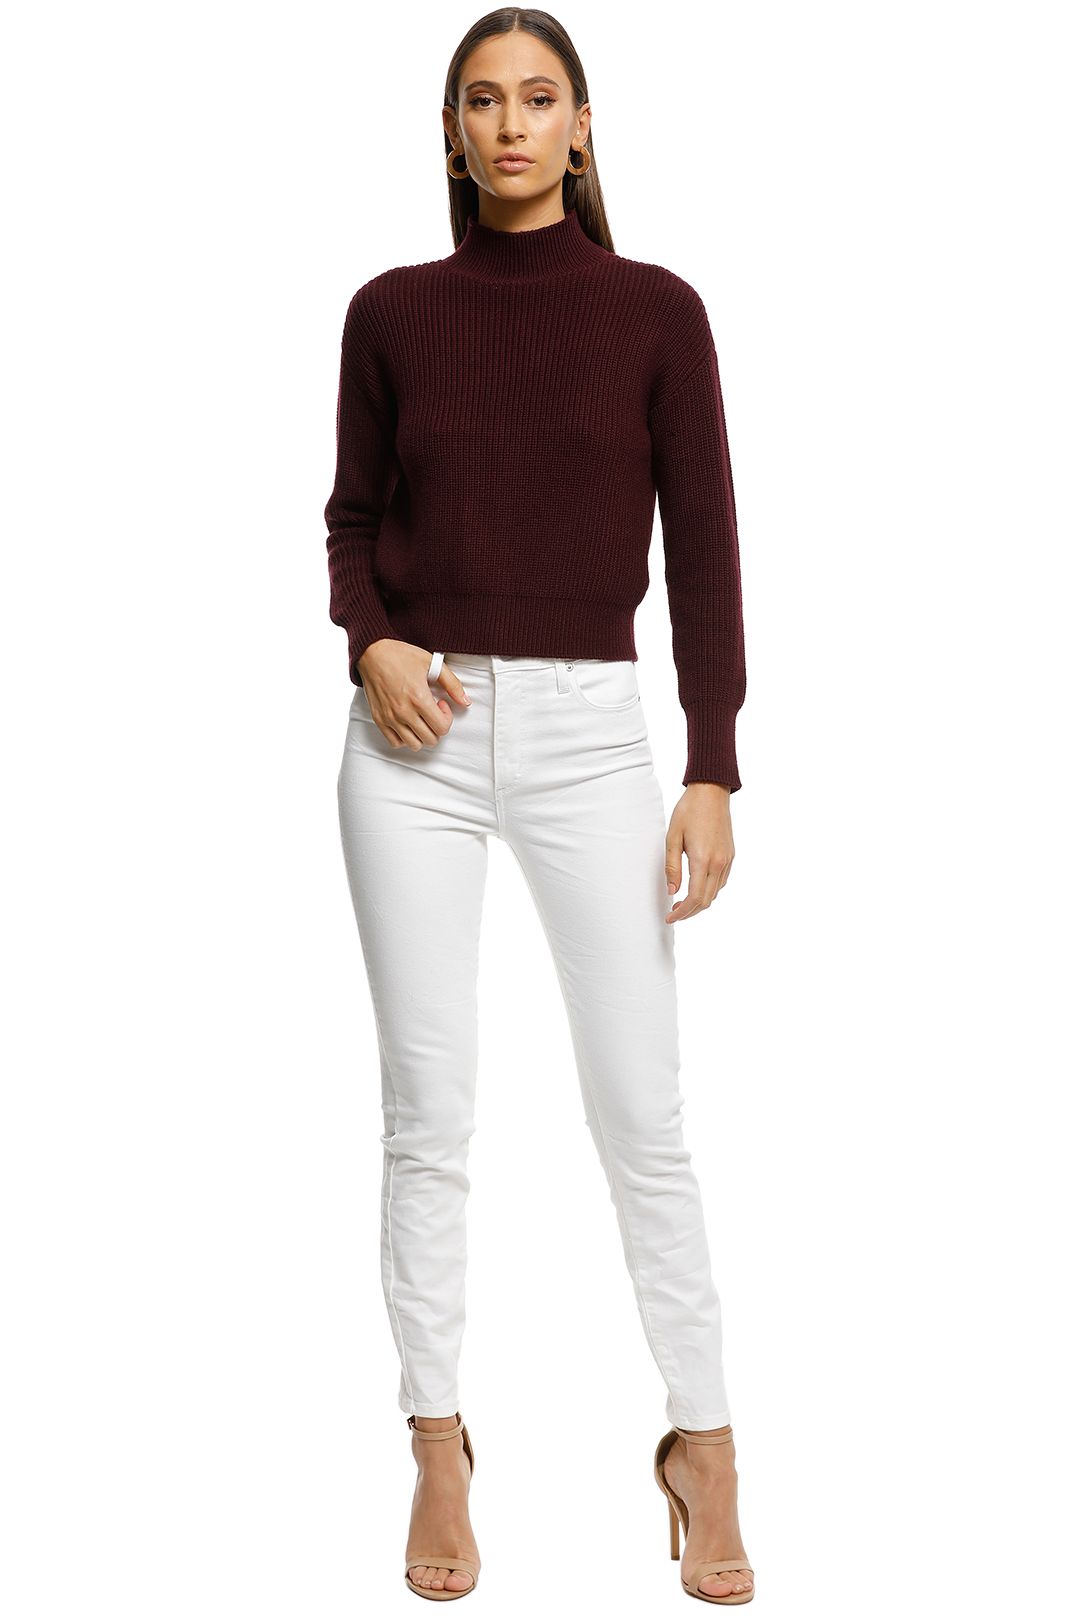 Rodeo Show - Adriana Knit - Plum - Front